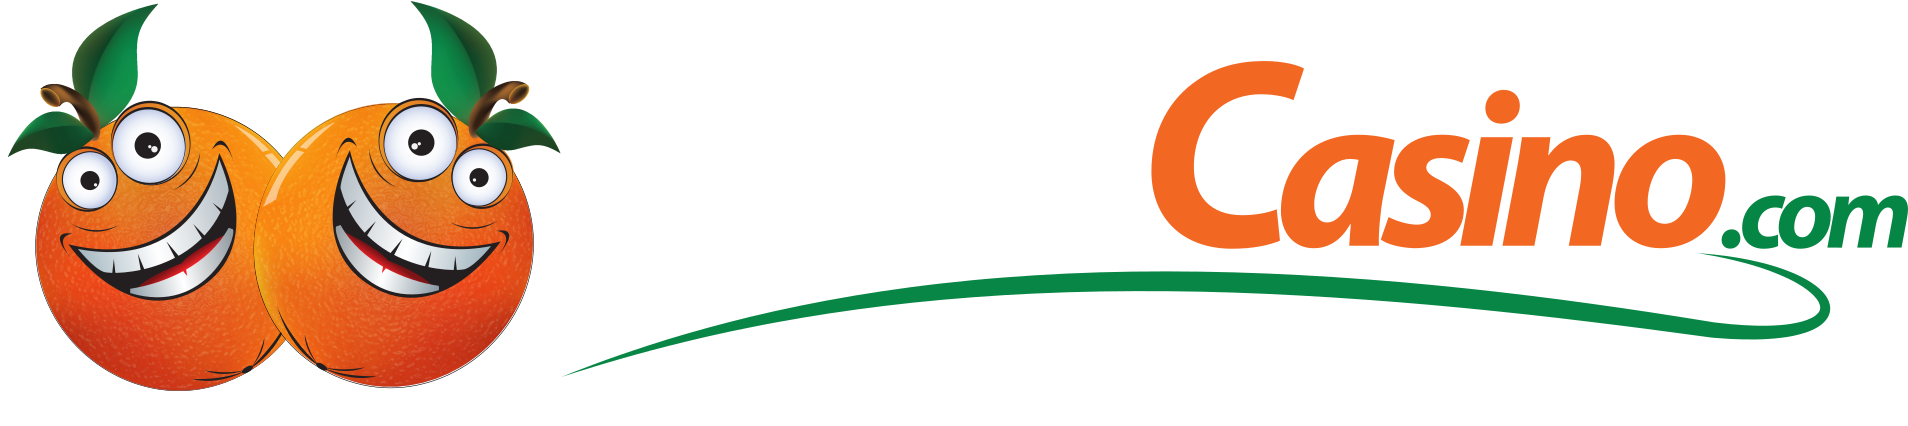 Casino as One of the Leading Gambling Sites Listed with fastest psyouts